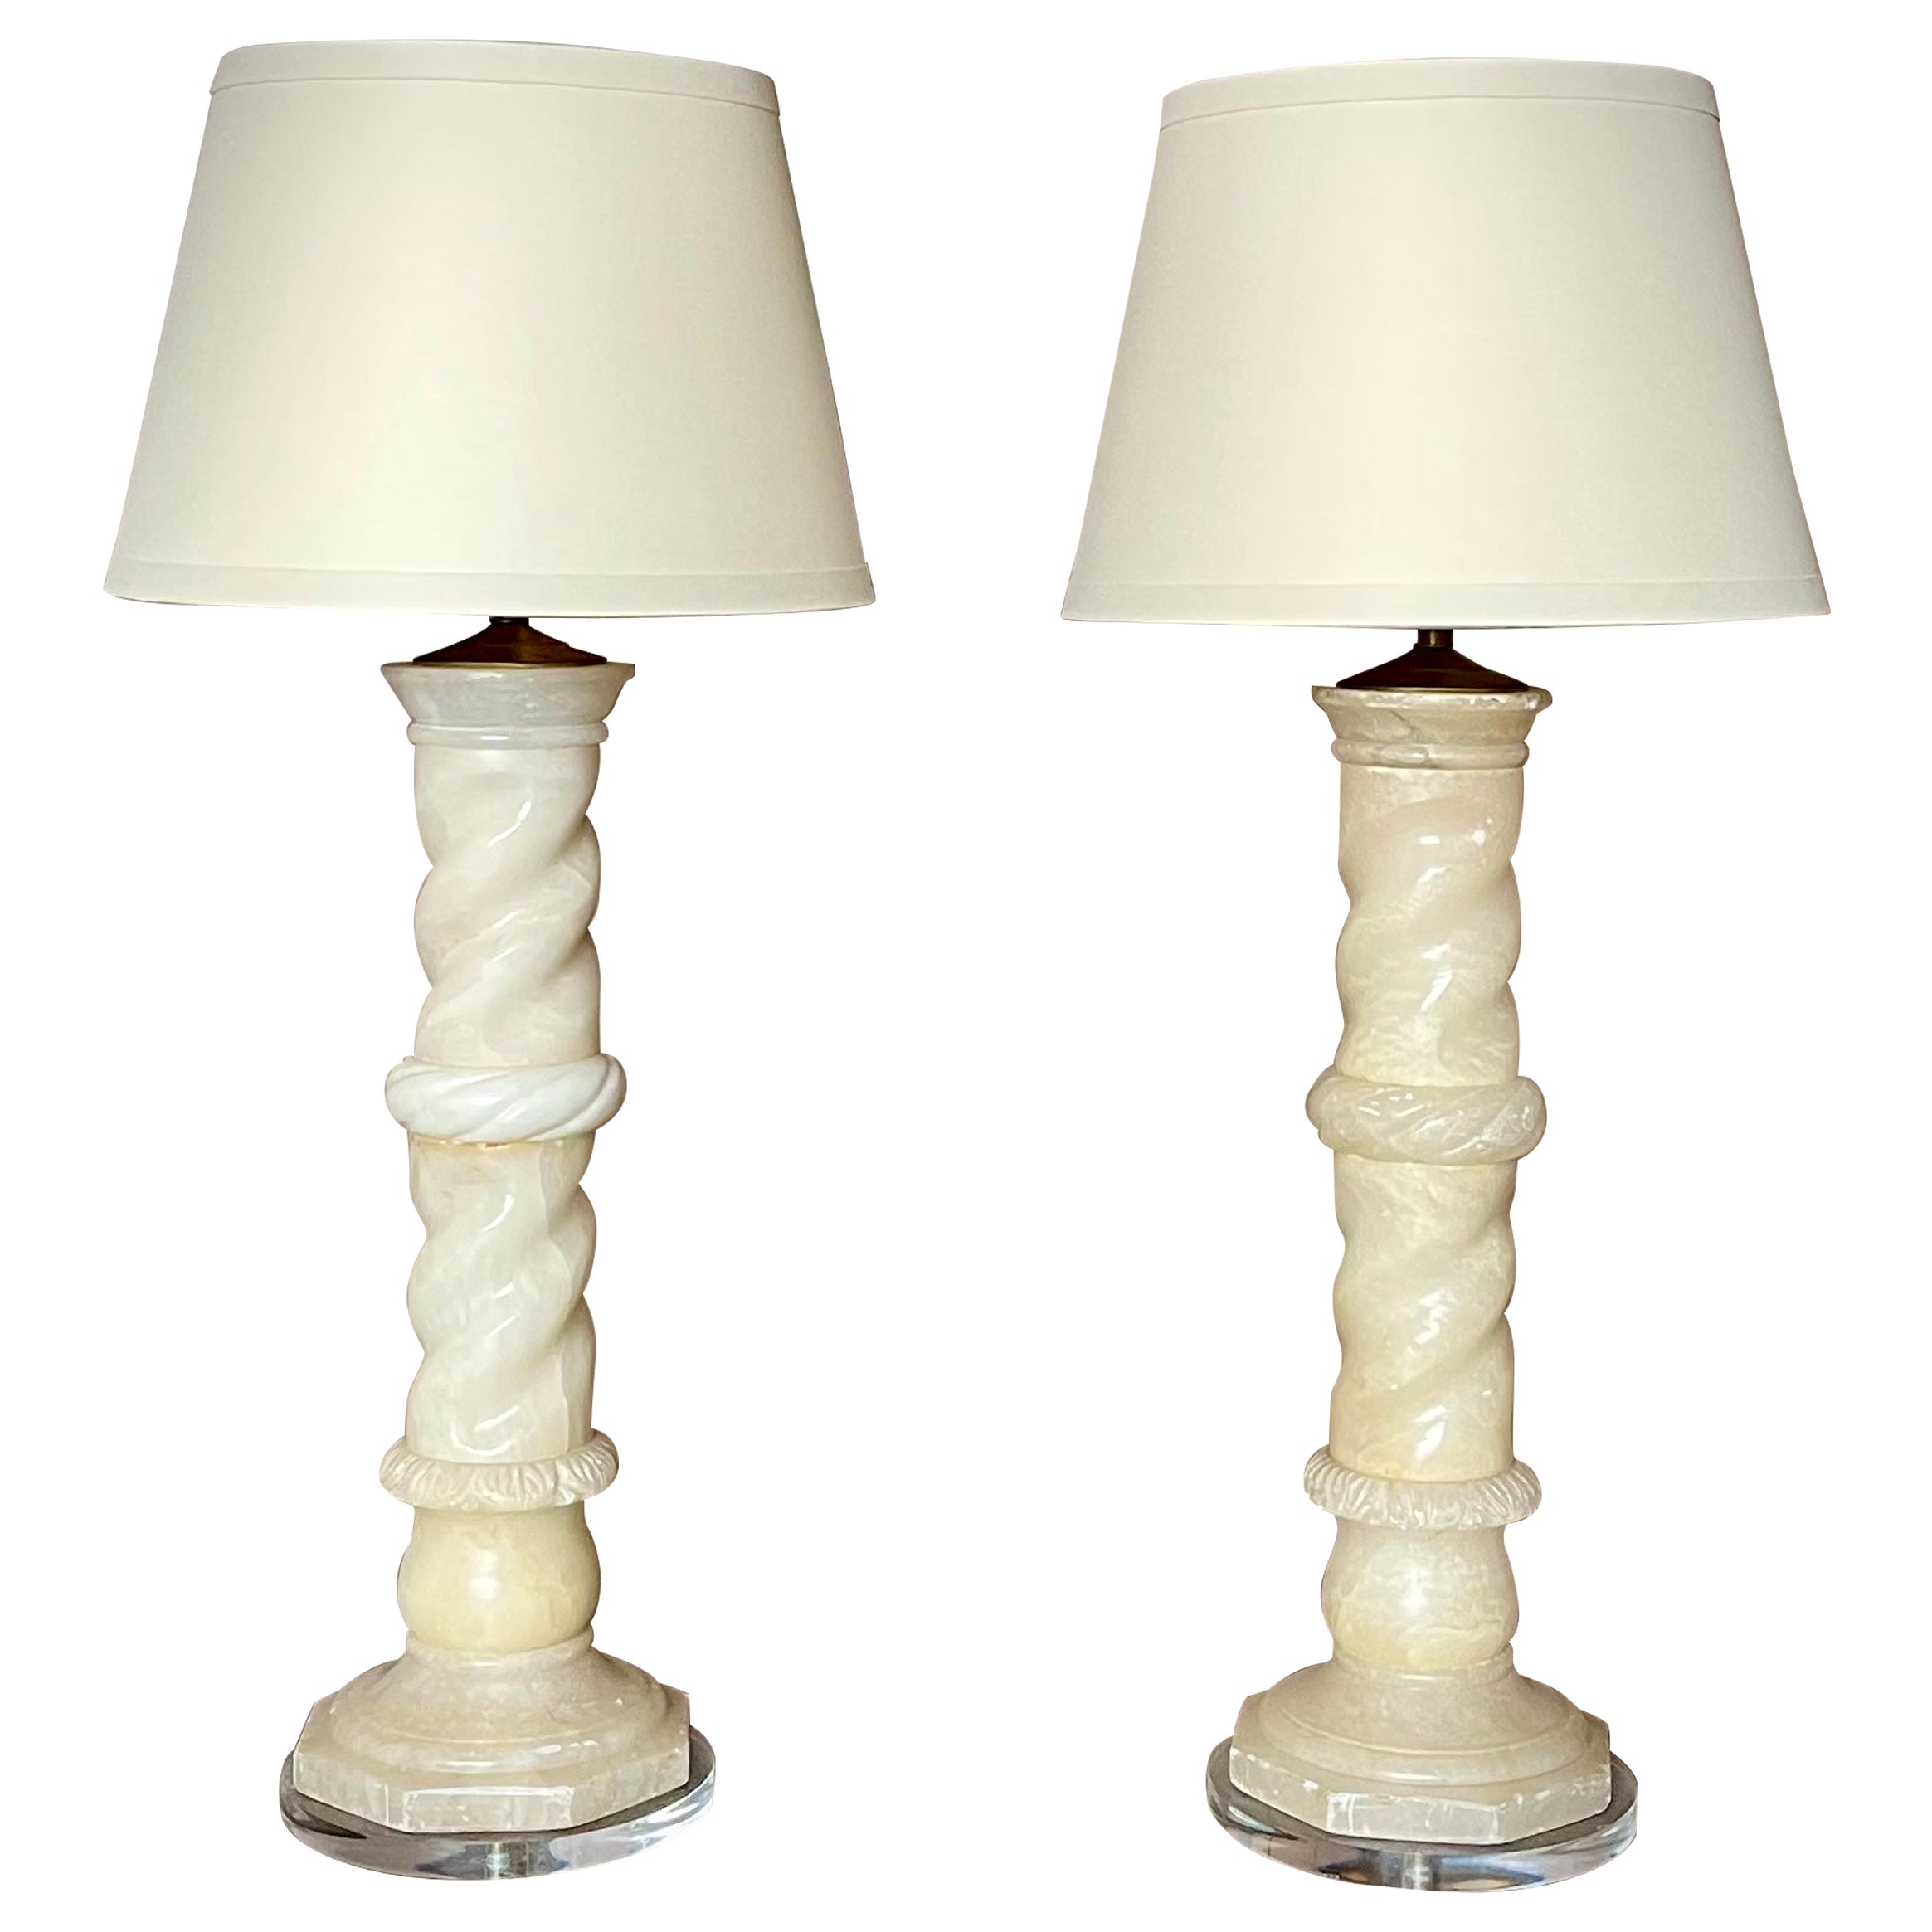 Pair Antique Italian Architectural Alabaster Lamps, Lucite Bases, Spiral Carved